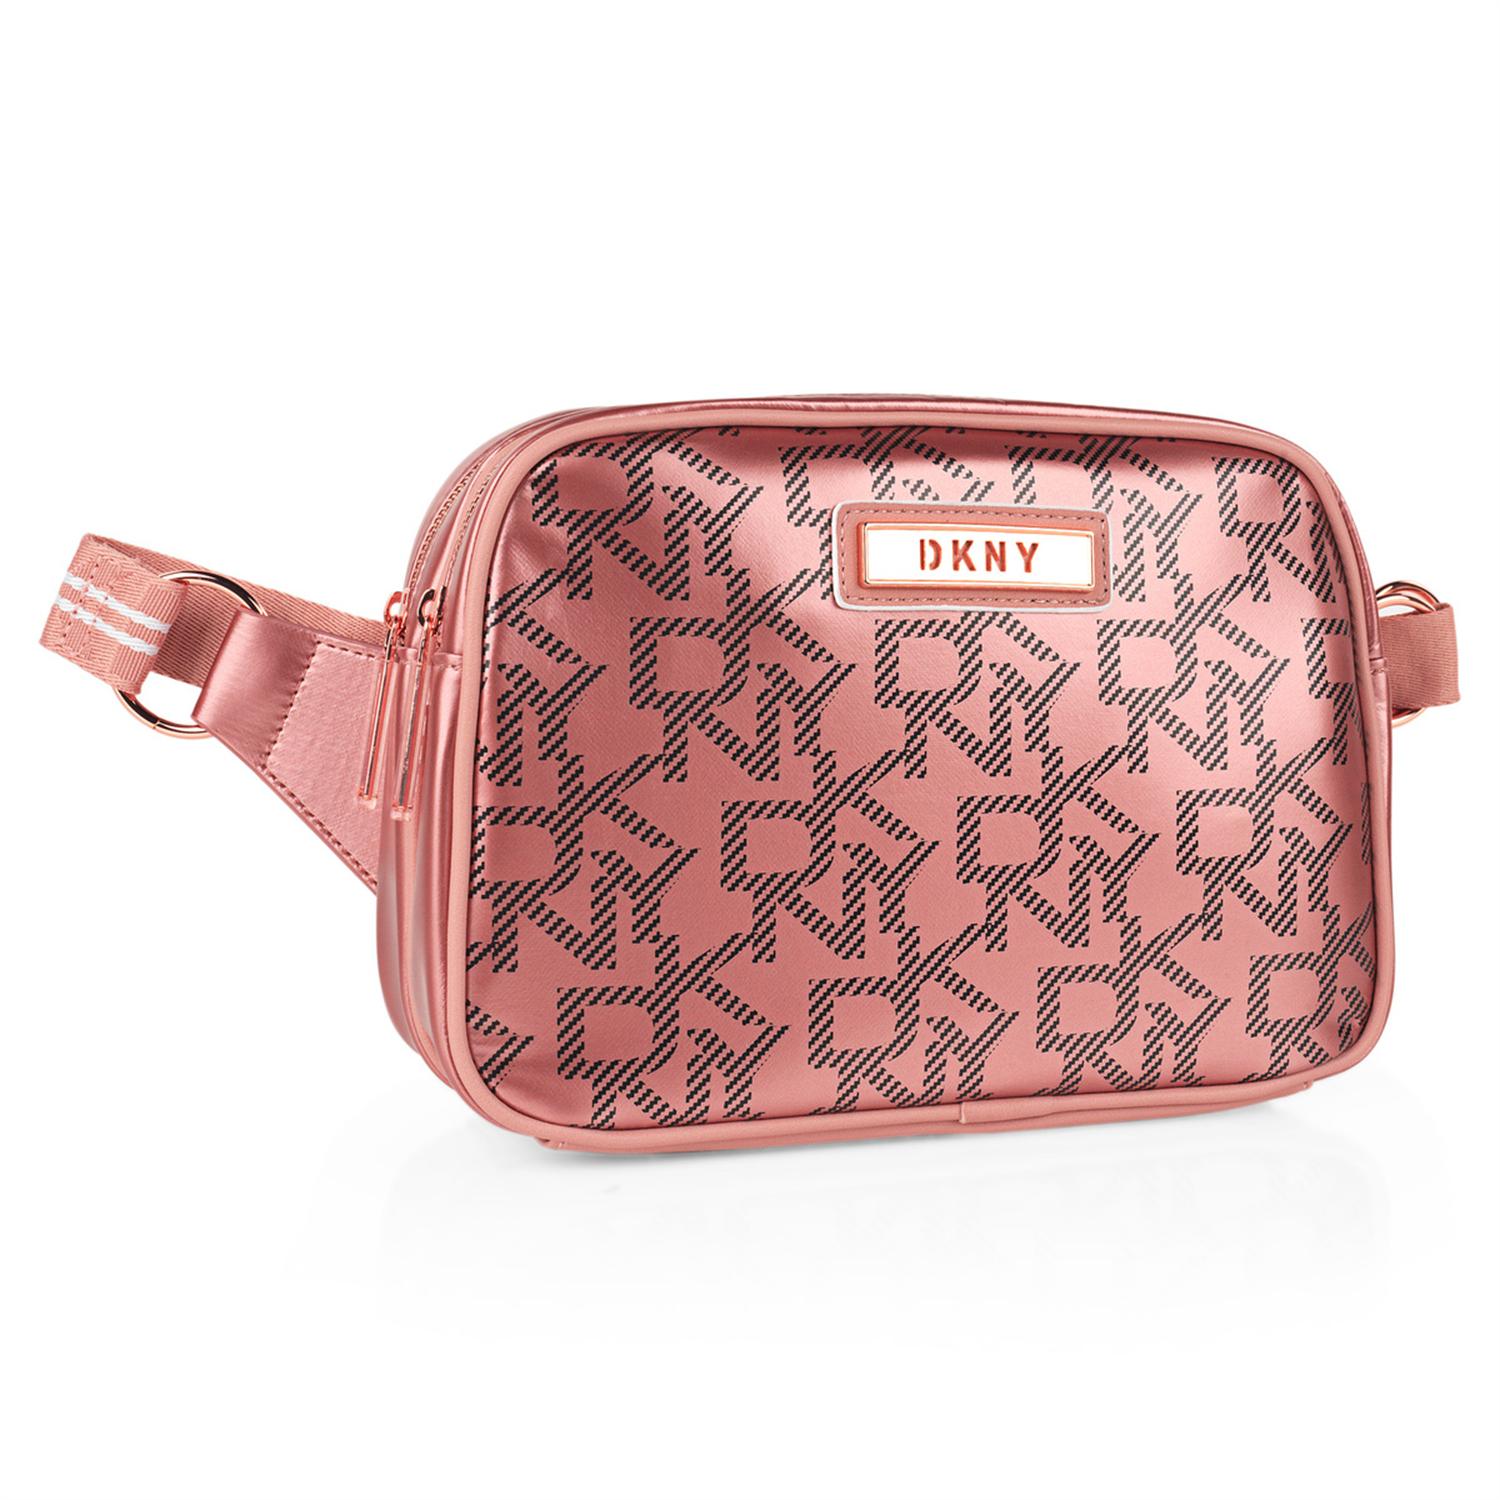 Dkny-624 Waist Pouch After Hours Dkny Dkny-624 After Hours